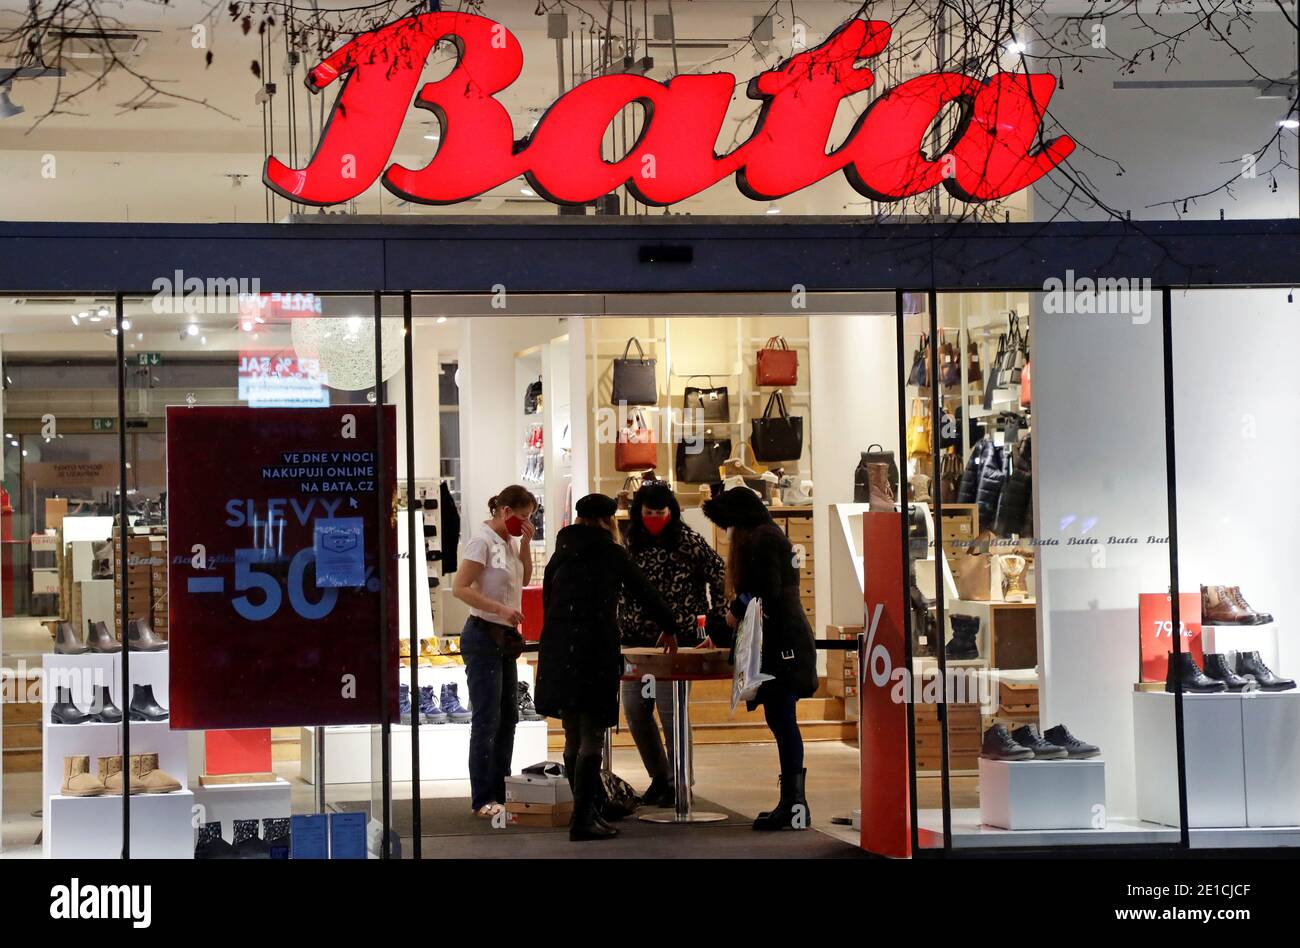 Customers pick-up their shoes order at the entrance of a closed Bata store  amid the coronavirus disease (COVID-19) outbreak in Prague, Czech Republic,  January 6, 2021. REUTERS/David W Cerny Stock Photo -